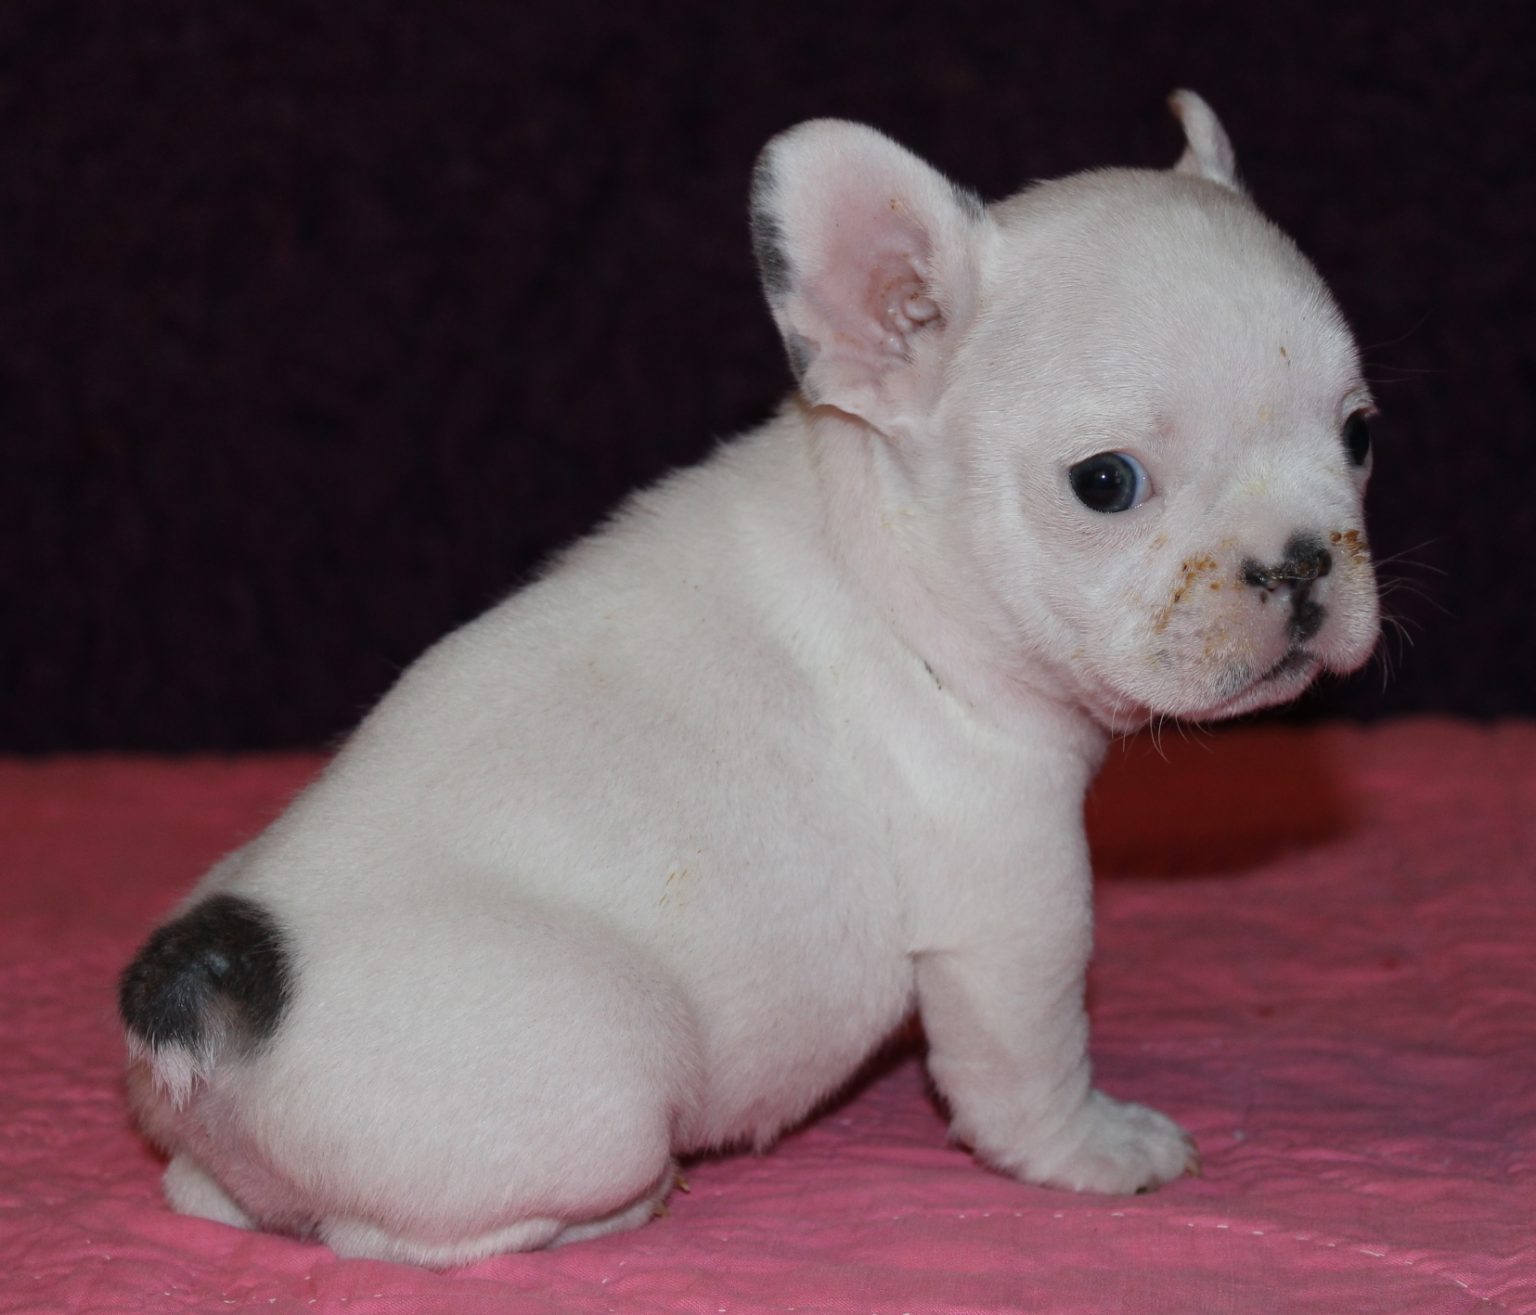 French Bulldog Puppies for Sale | Huskerland Bulldogs | AKC Registered